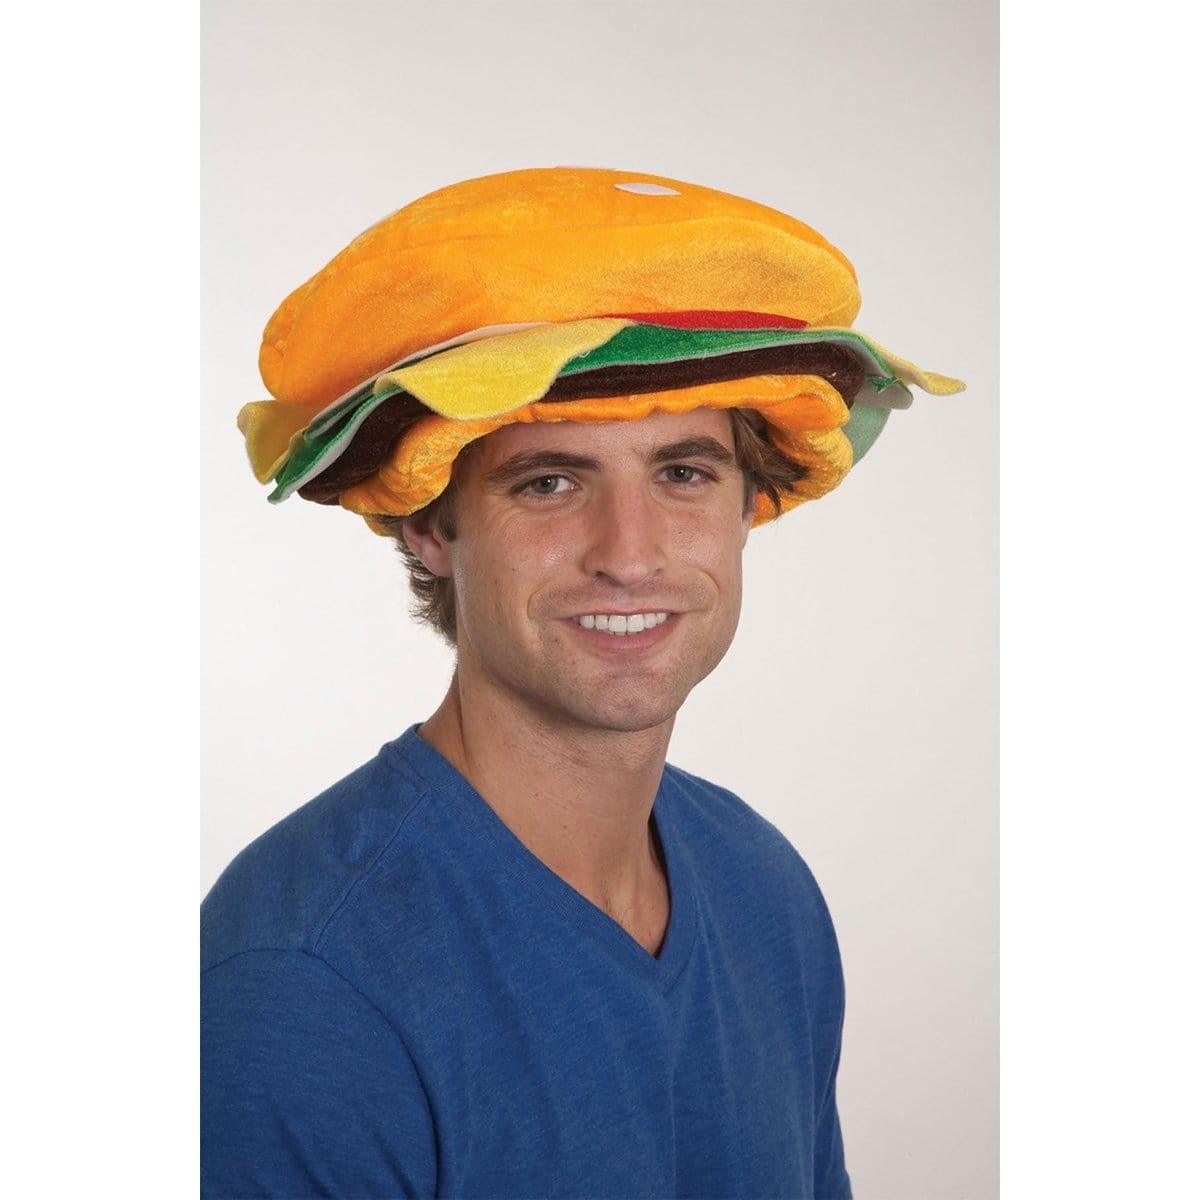 Buy Costume Accessories Hamburger hat for adults sold at Party Expert